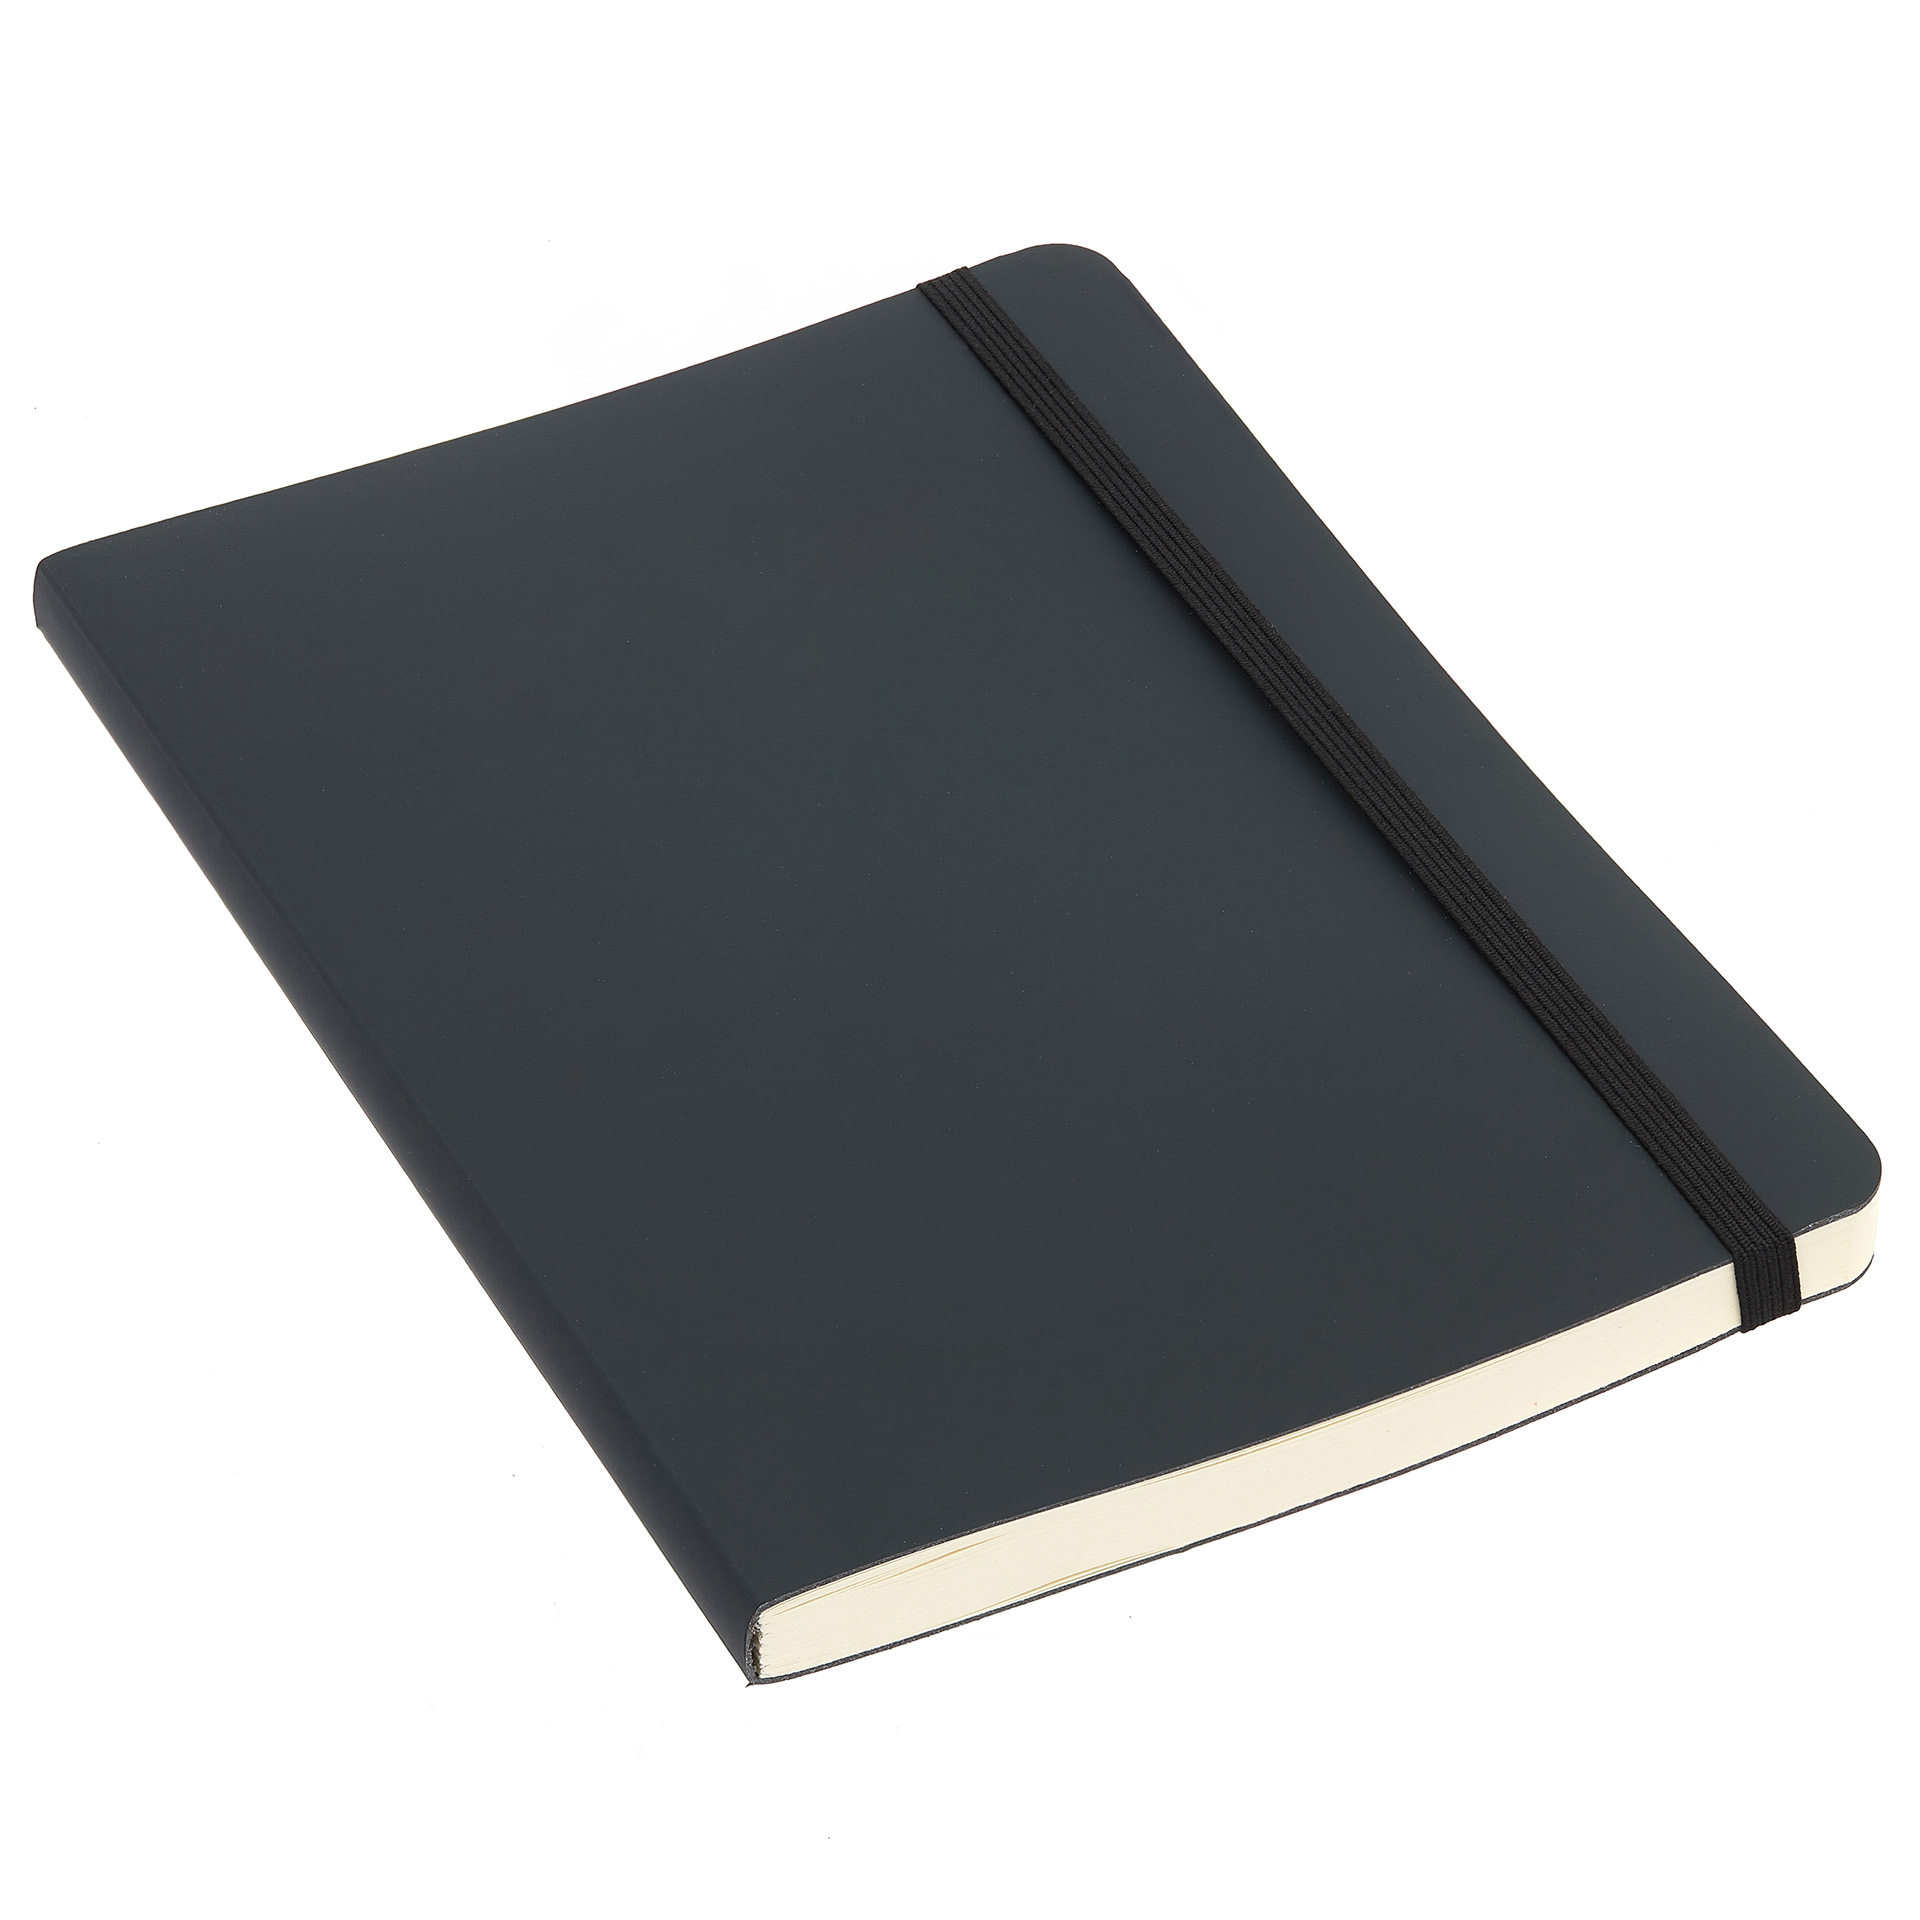 Contemporary notebook with covers made from recycled leather fibres which are Oekotex certified. Made in the EU, this notebook has a great feel is and is beautifully finished. Comes as standard with 192 (96 sheets) pages ivory sustainable LINED paper. Available in 6 stylish colours with elastic closures as shown.